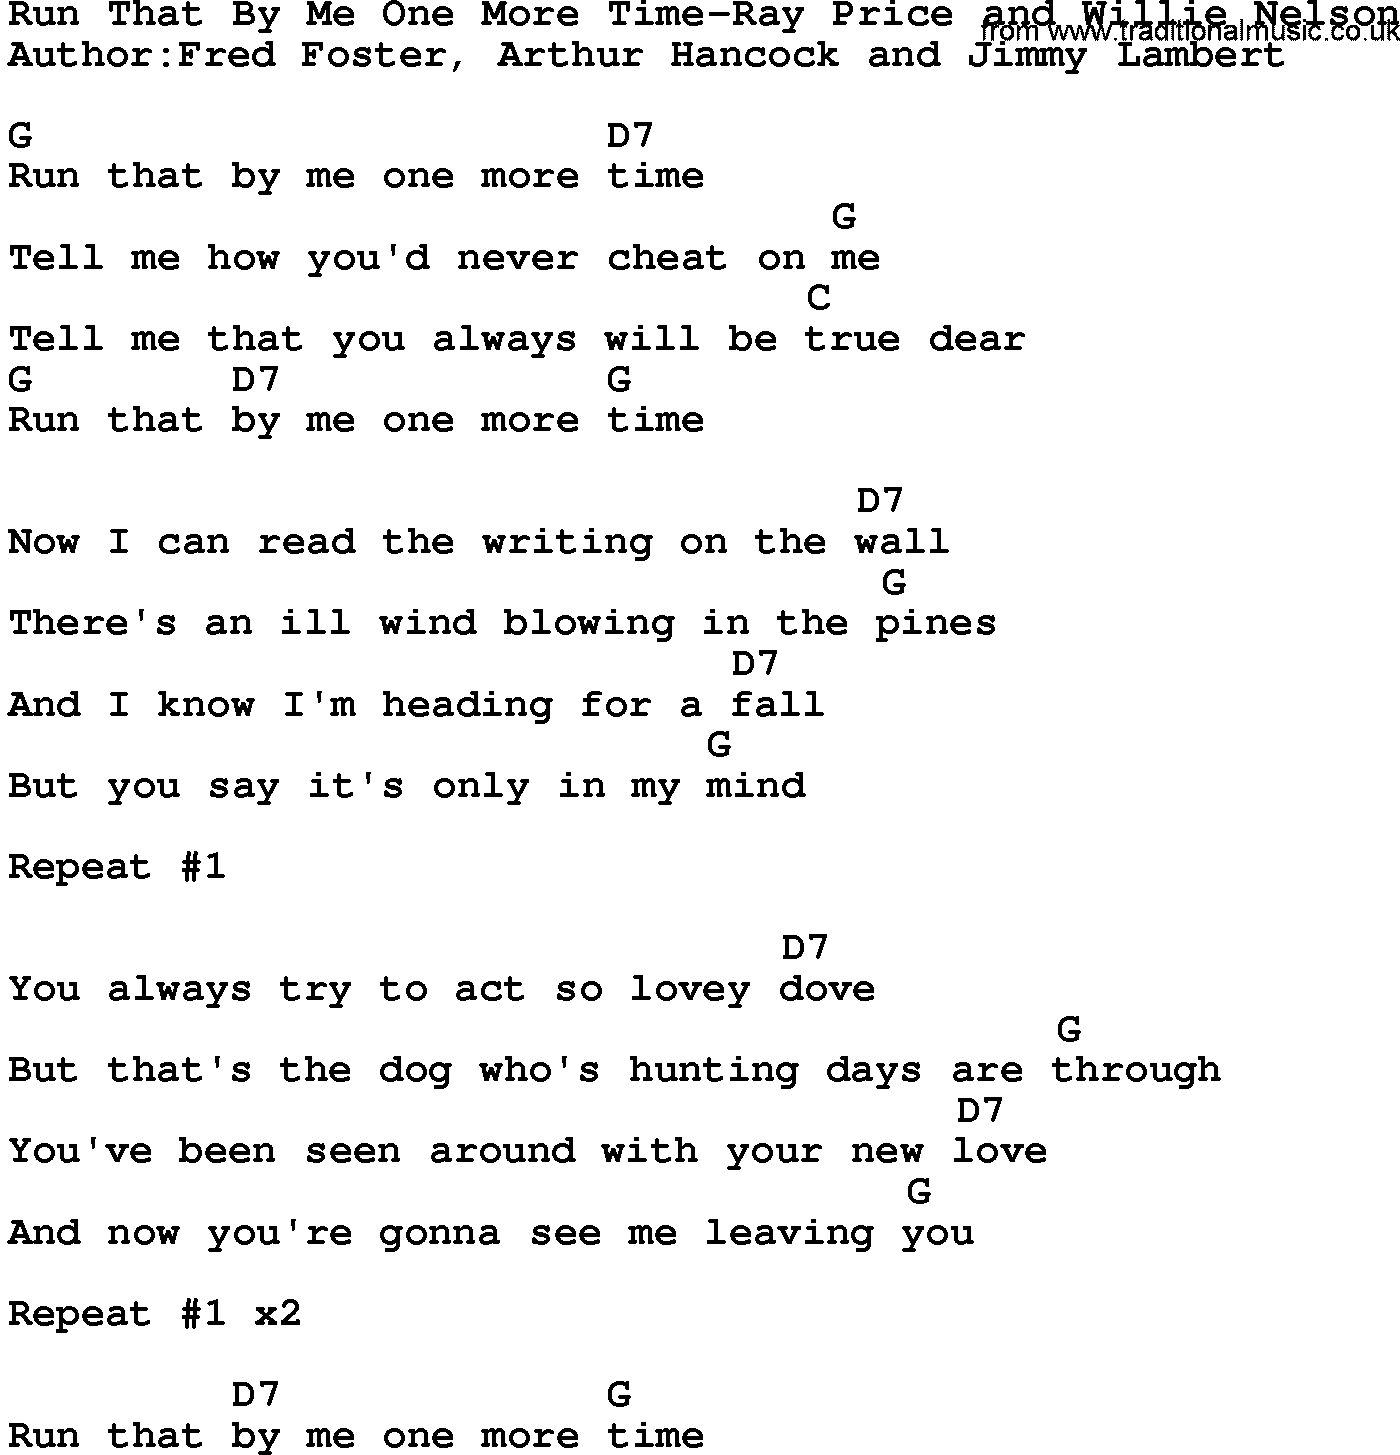 Country music song: Run That By Me One More Time-Ray Price And Willie Nelson lyrics and chords